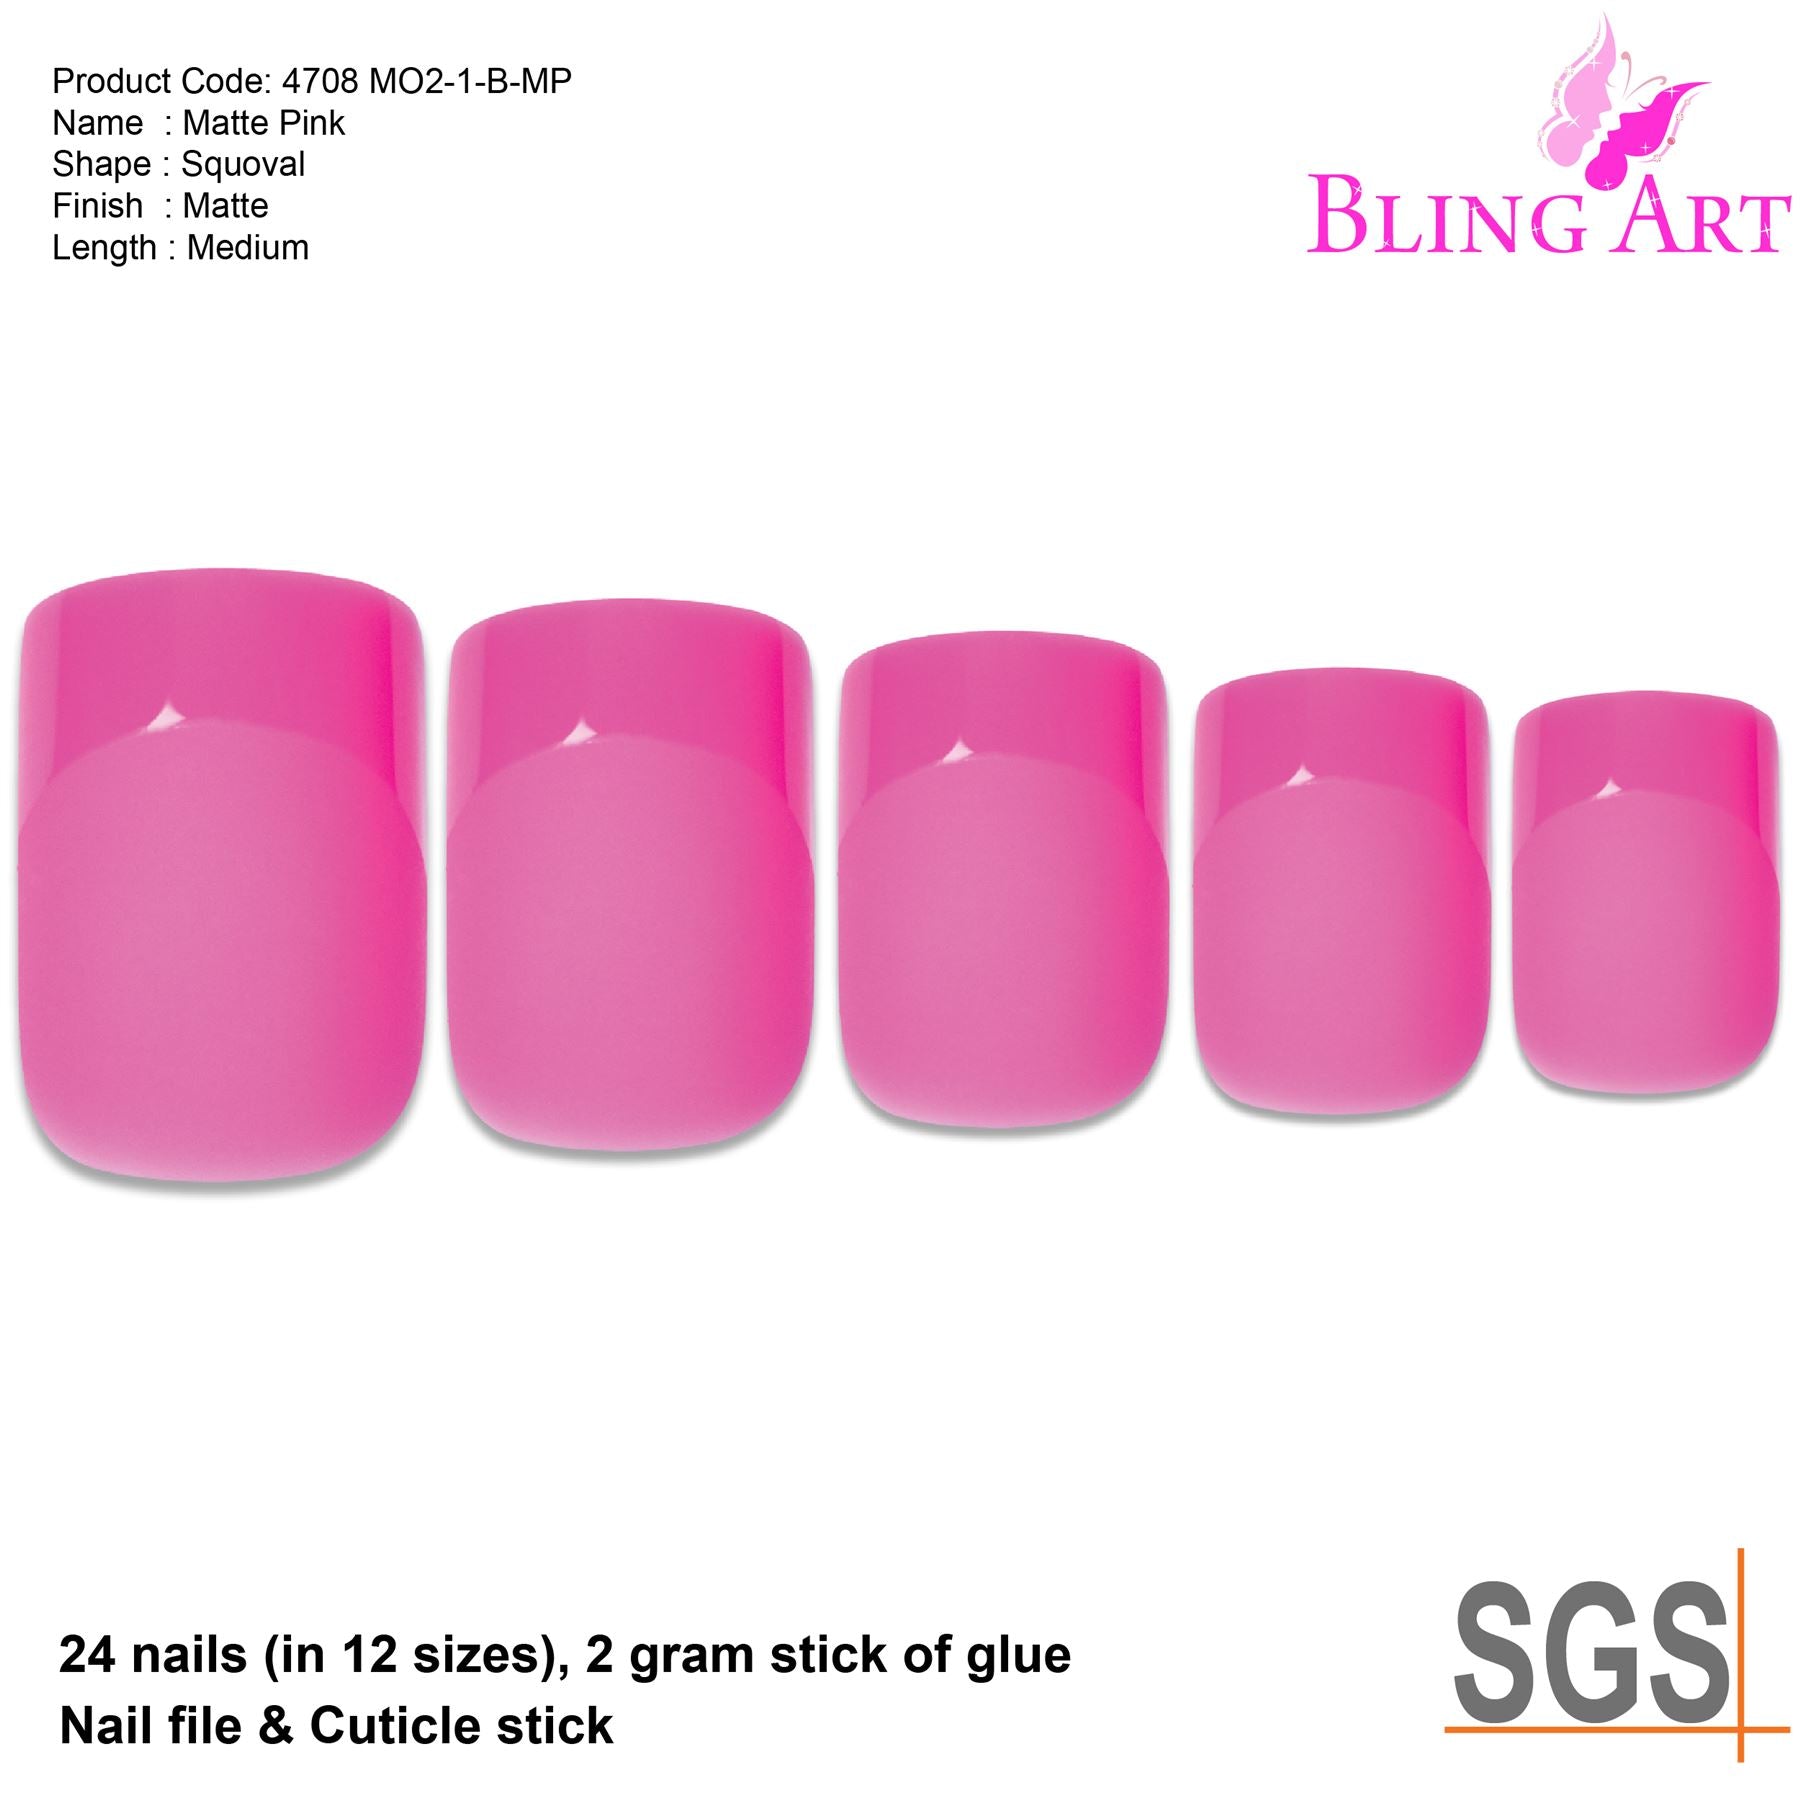 False Nails by Bling Art Pink Matte French Manicure Fake Medium Tips with Glue